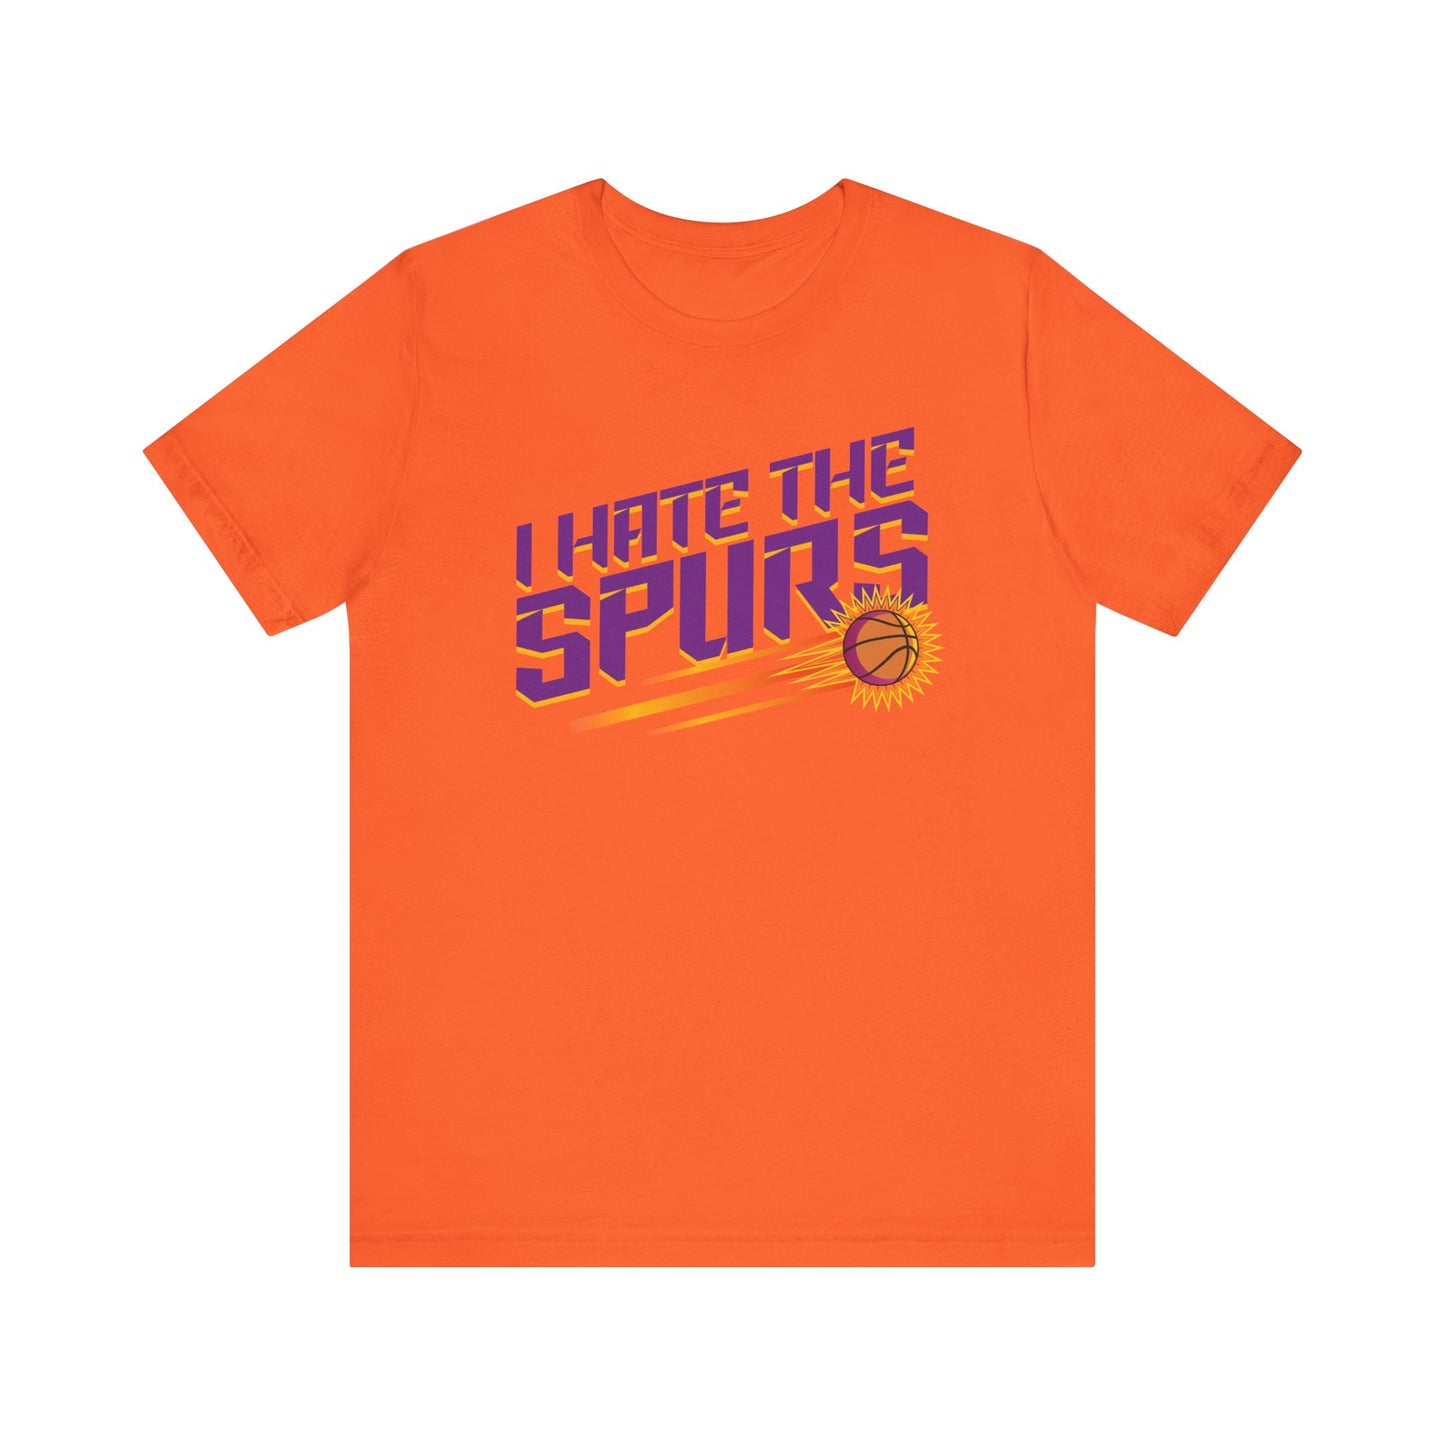 I Hate The Spurz (for Phoenix fans) - Unisex Jersey Short Sleeve Tee